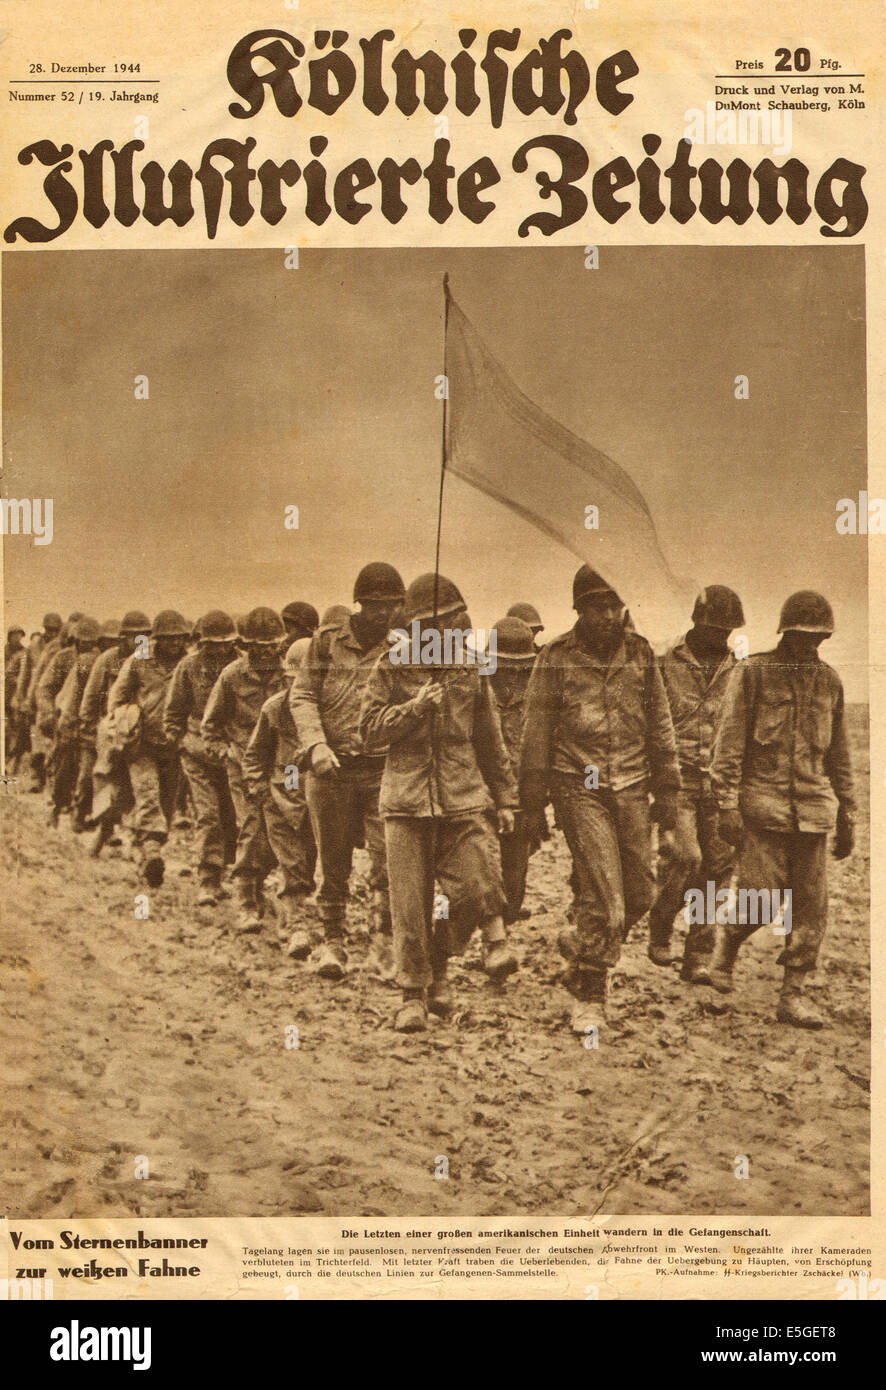 1944 Kolnischer Illustrierte Zeitung front page showing American prisoners of war during the Battle of the Bulge Stock Photo